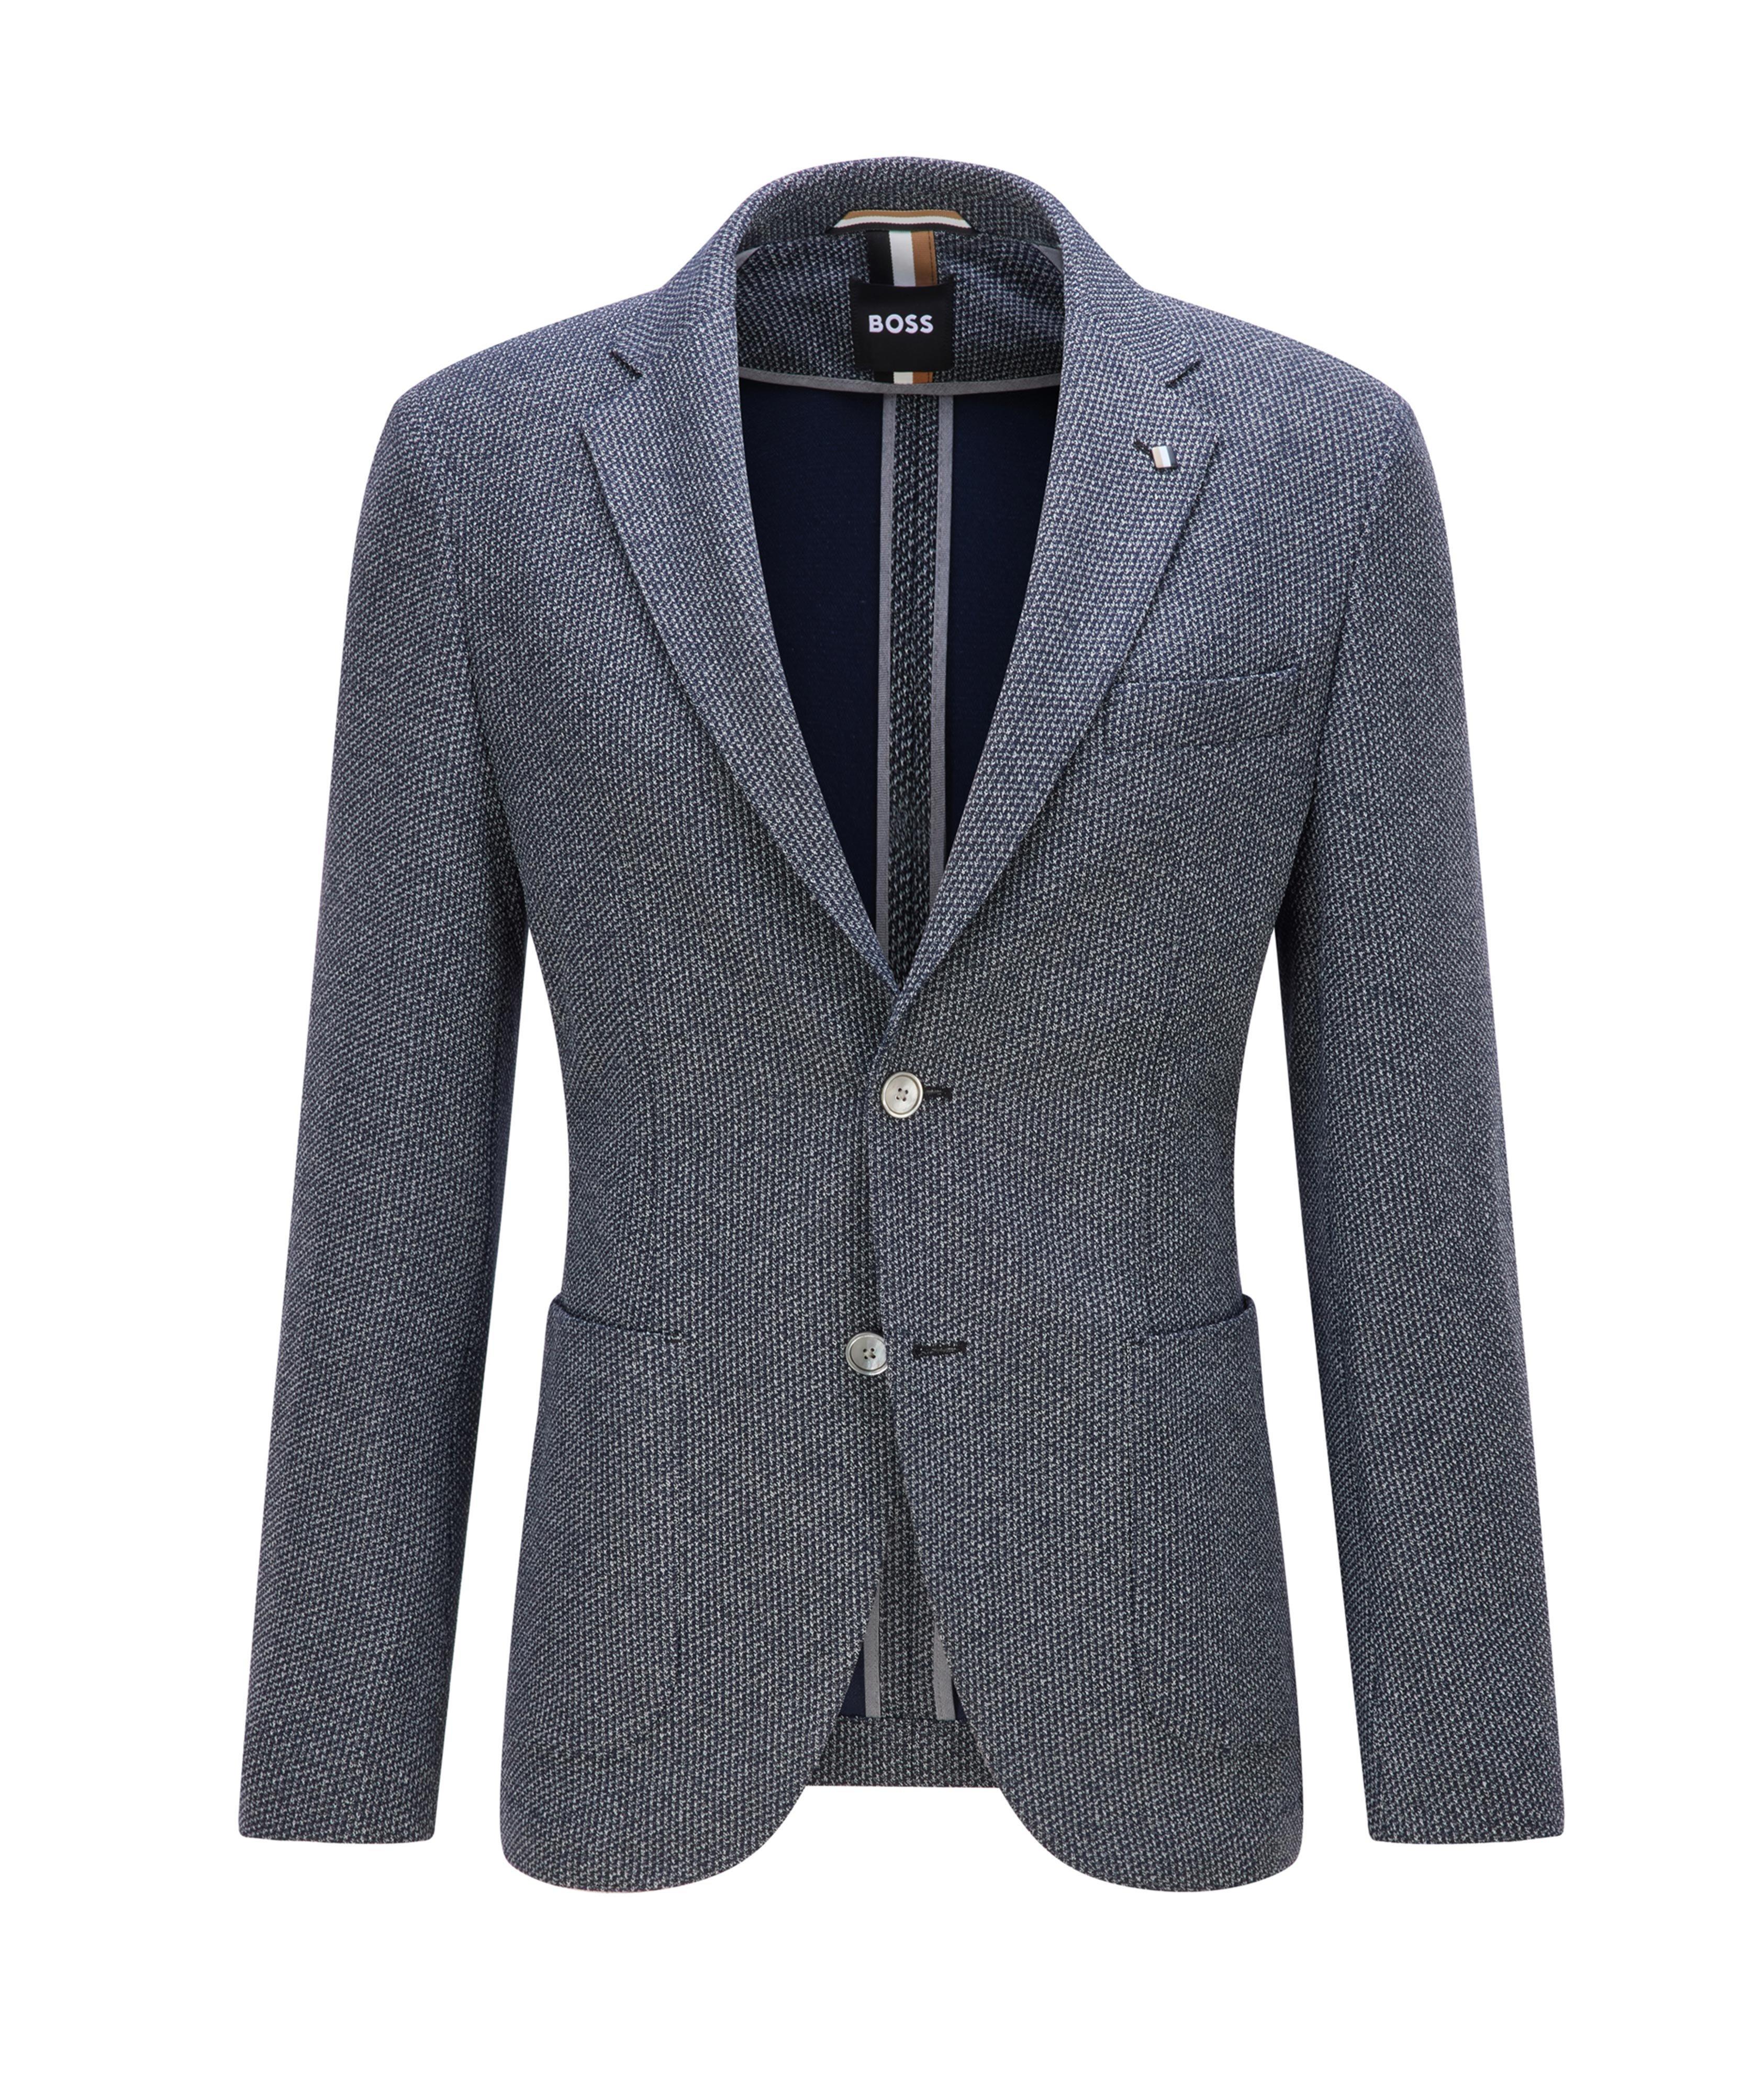 Sport Jacket In Patterned Jersey with Elbow Patches image 0